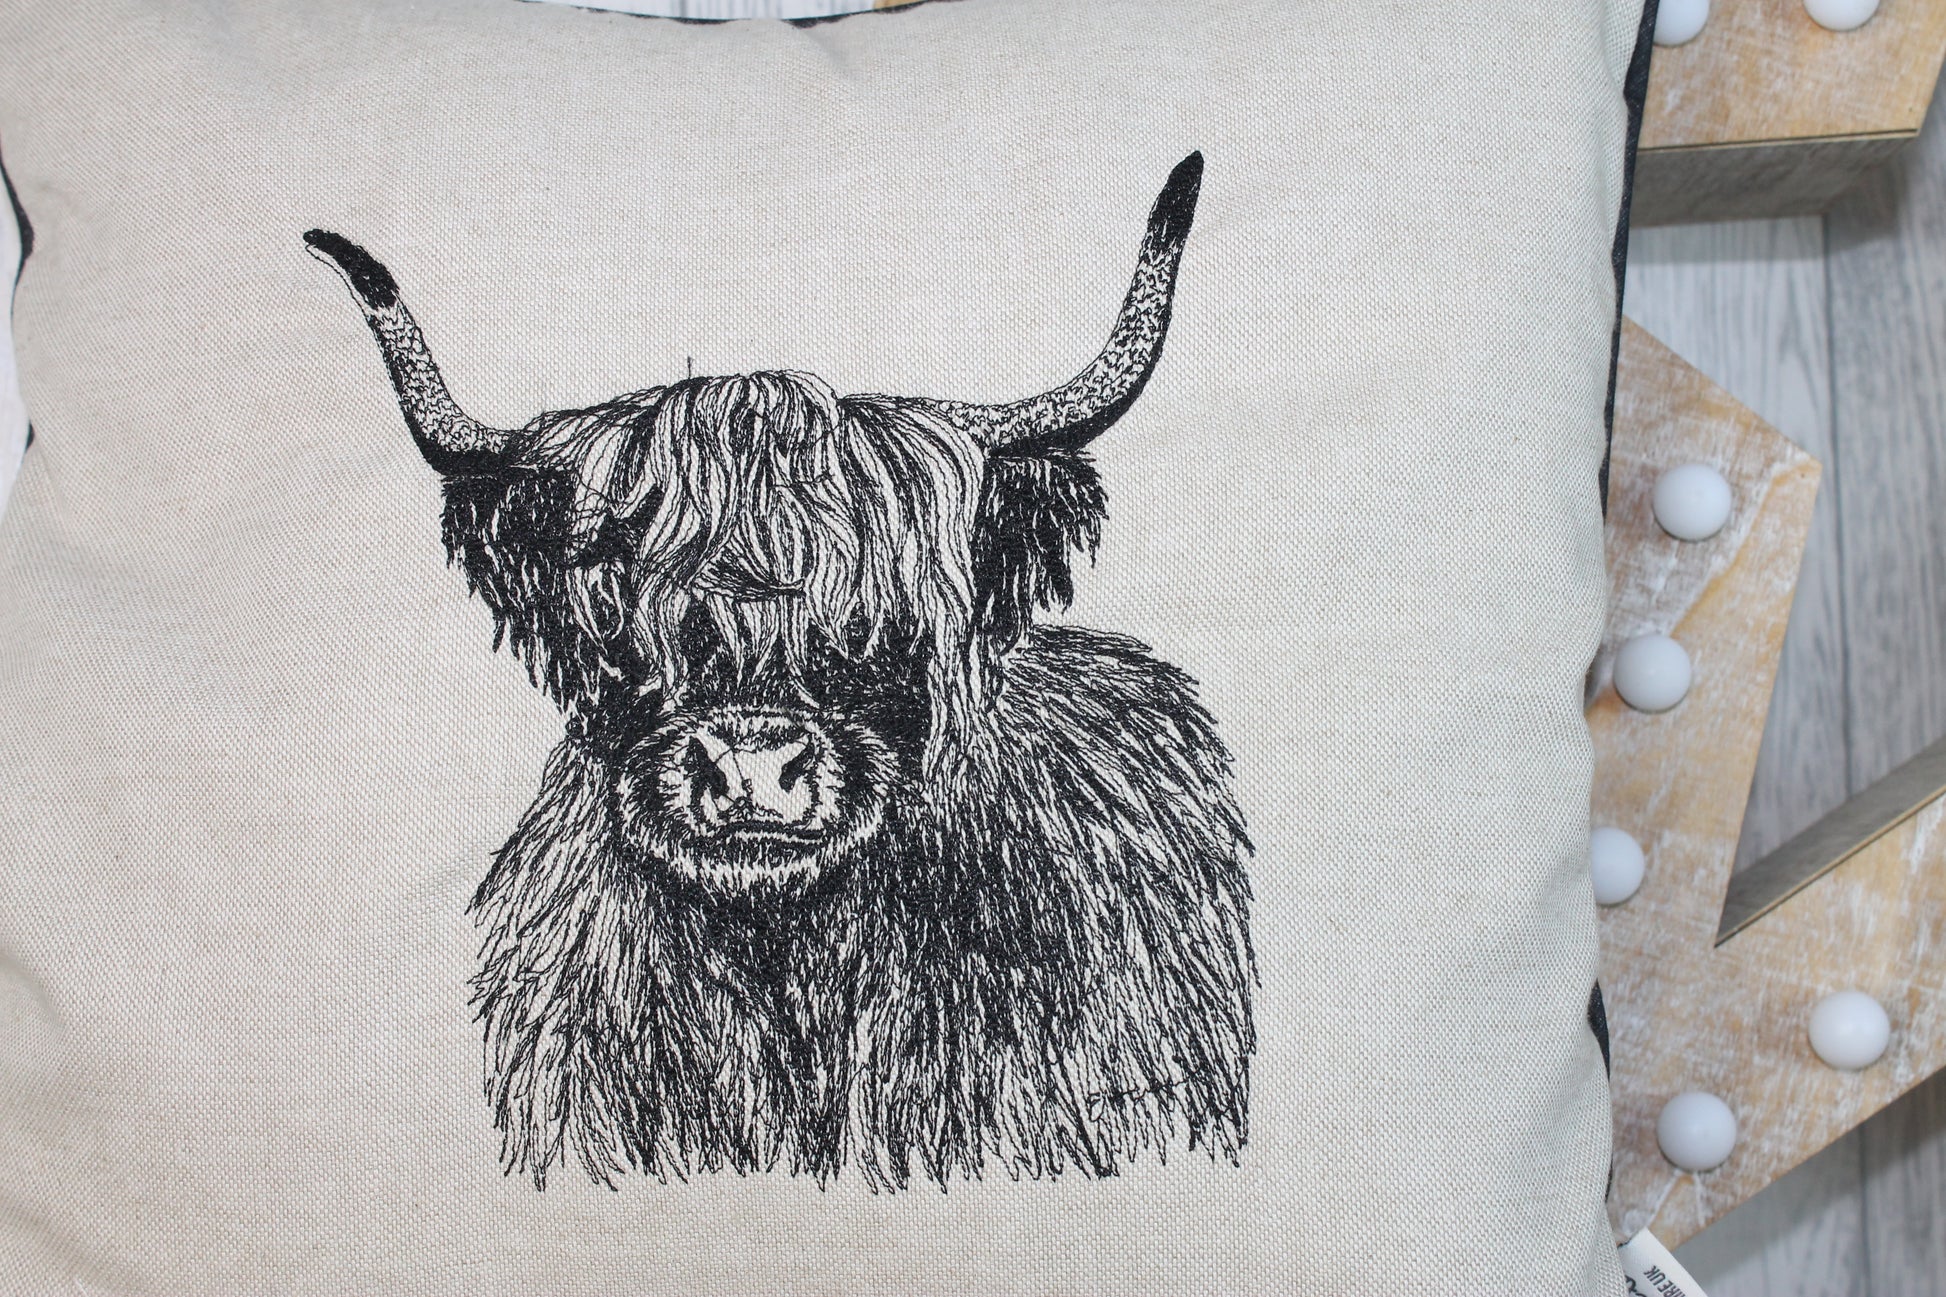 Highland Cow Cushion, Cream/Taupe Piped Embroidered Cushion - Lizzie Dixon Designs